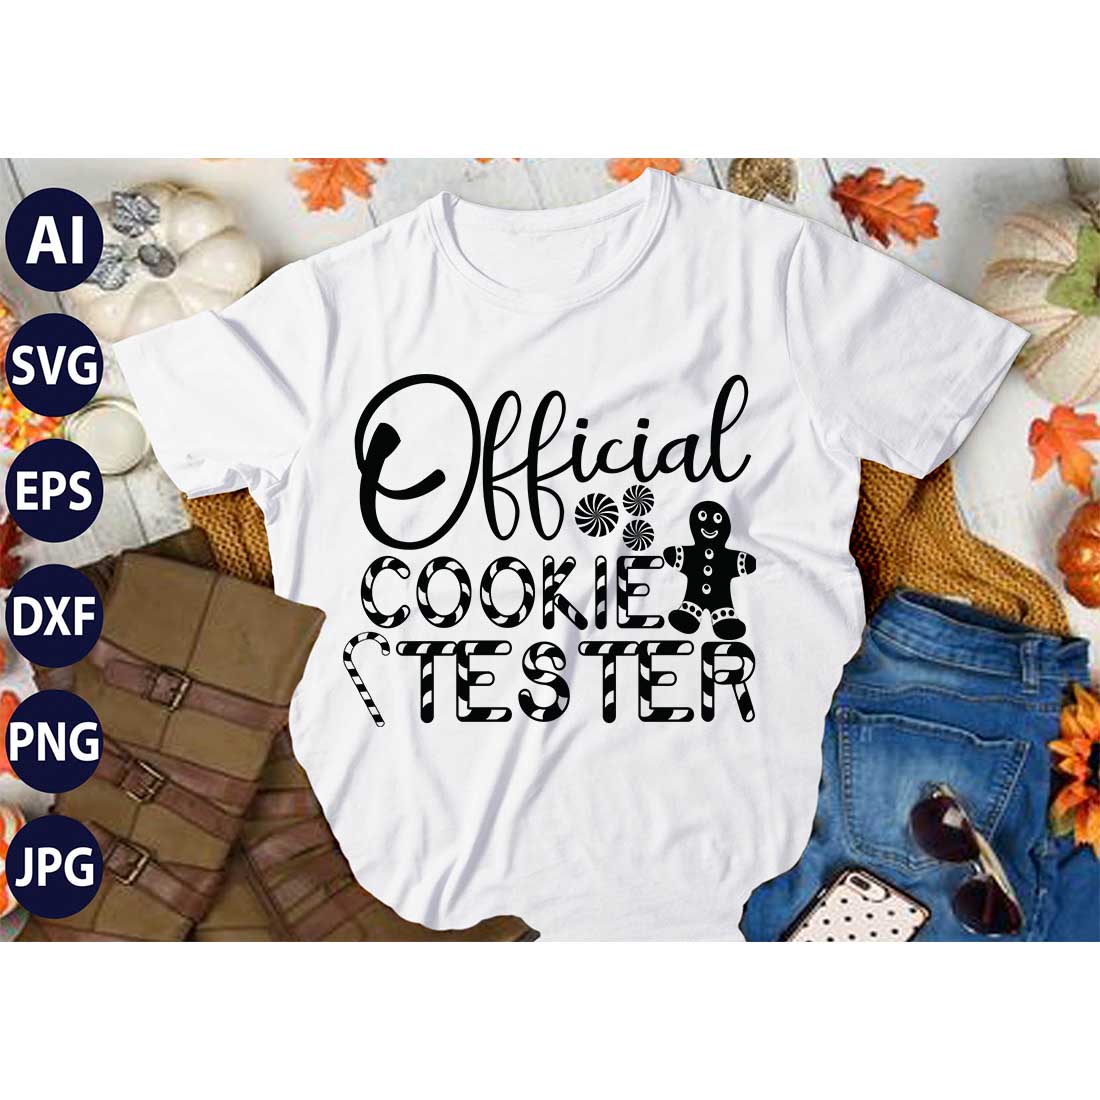 Official Cookie Tester all, SVG T-Shirt Design |Christmas It's All About Jesus Typography Tshirt Design | Ai, Svg, Eps, Dxf, Jpeg, Png, Instant download T-Shirt | 100% print-ready Digital vector file preview image.